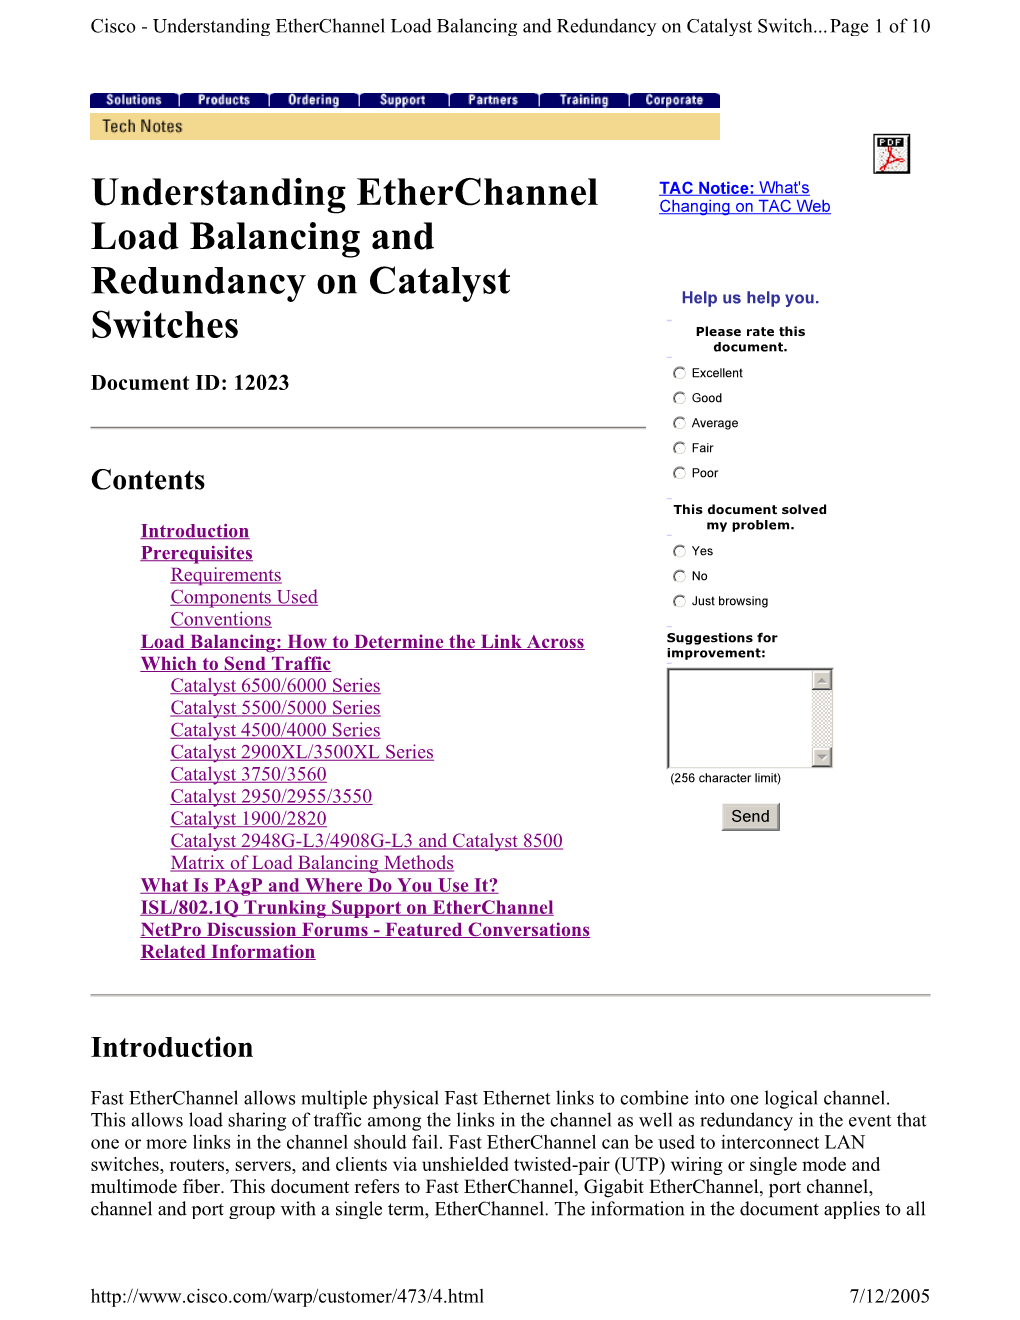 Understanding Etherchannel Load Balancing and Redundancy on Catalyst Switch...Page 1 of 10